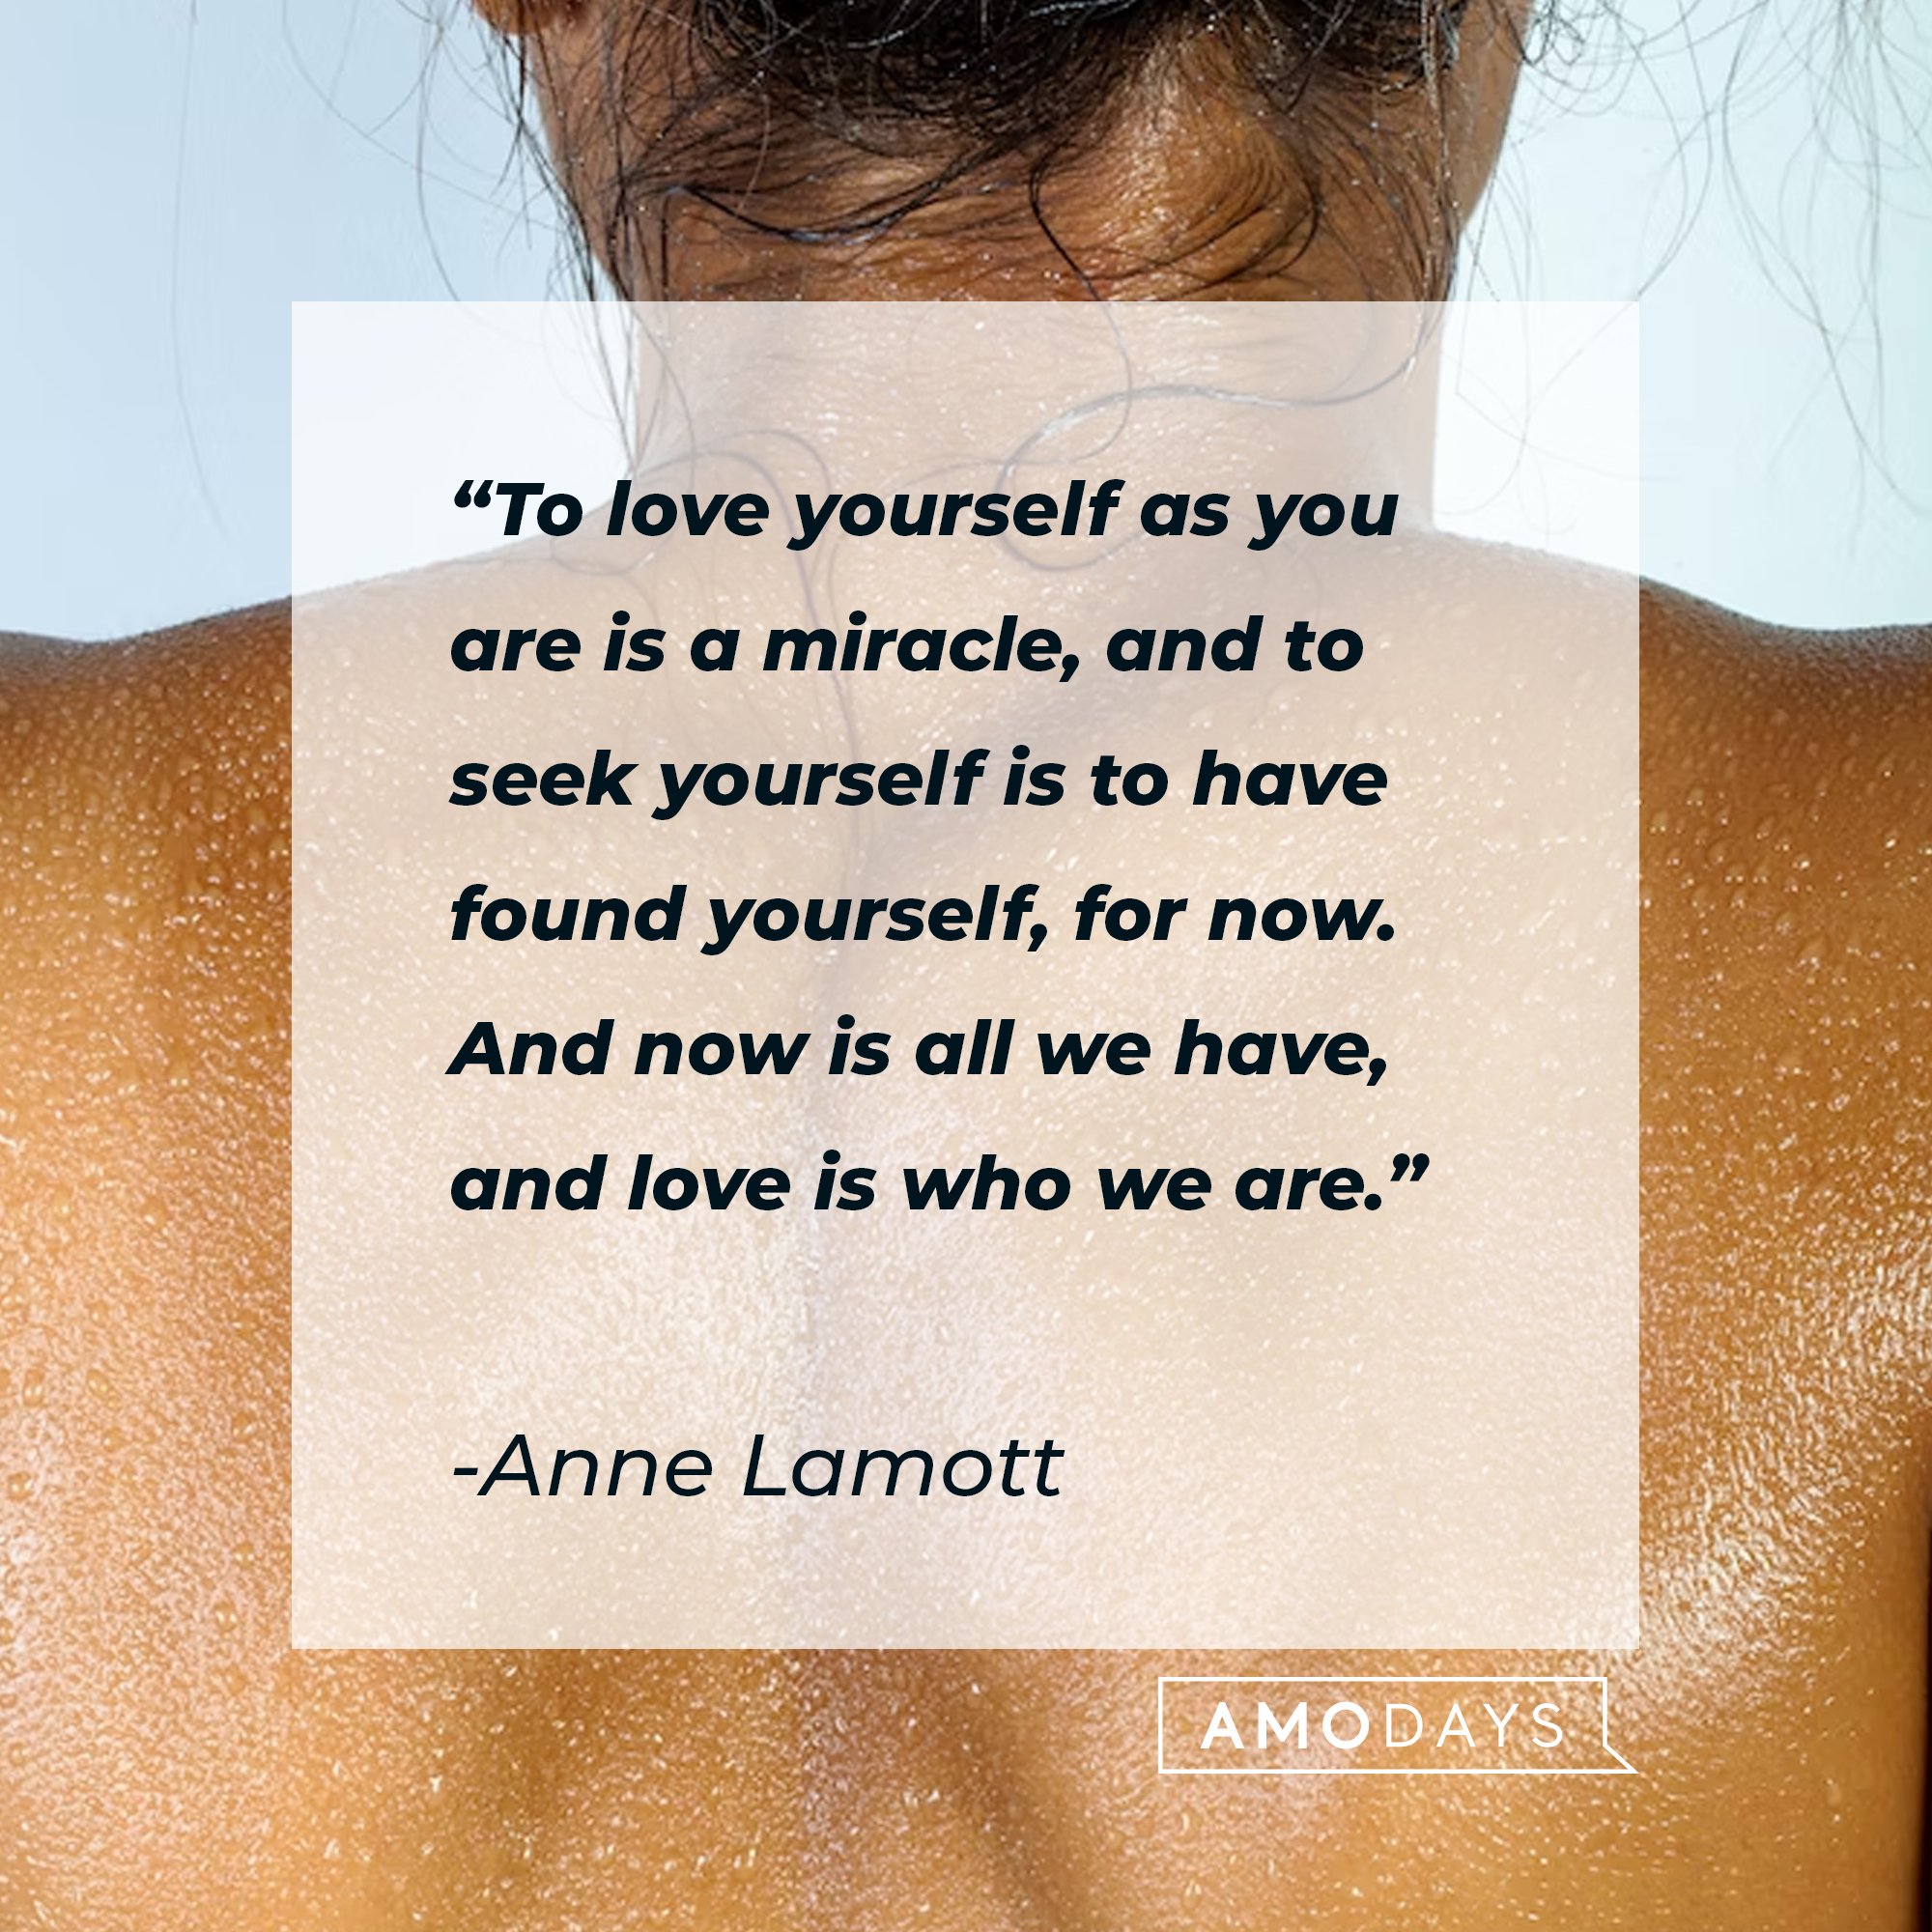 Anne Lamott’s quote: "To love yourself as you are is a miracle, and to seek yourself is to have found yourself, for now. And now is all we have, and love is who we are." | Image: AmoDays